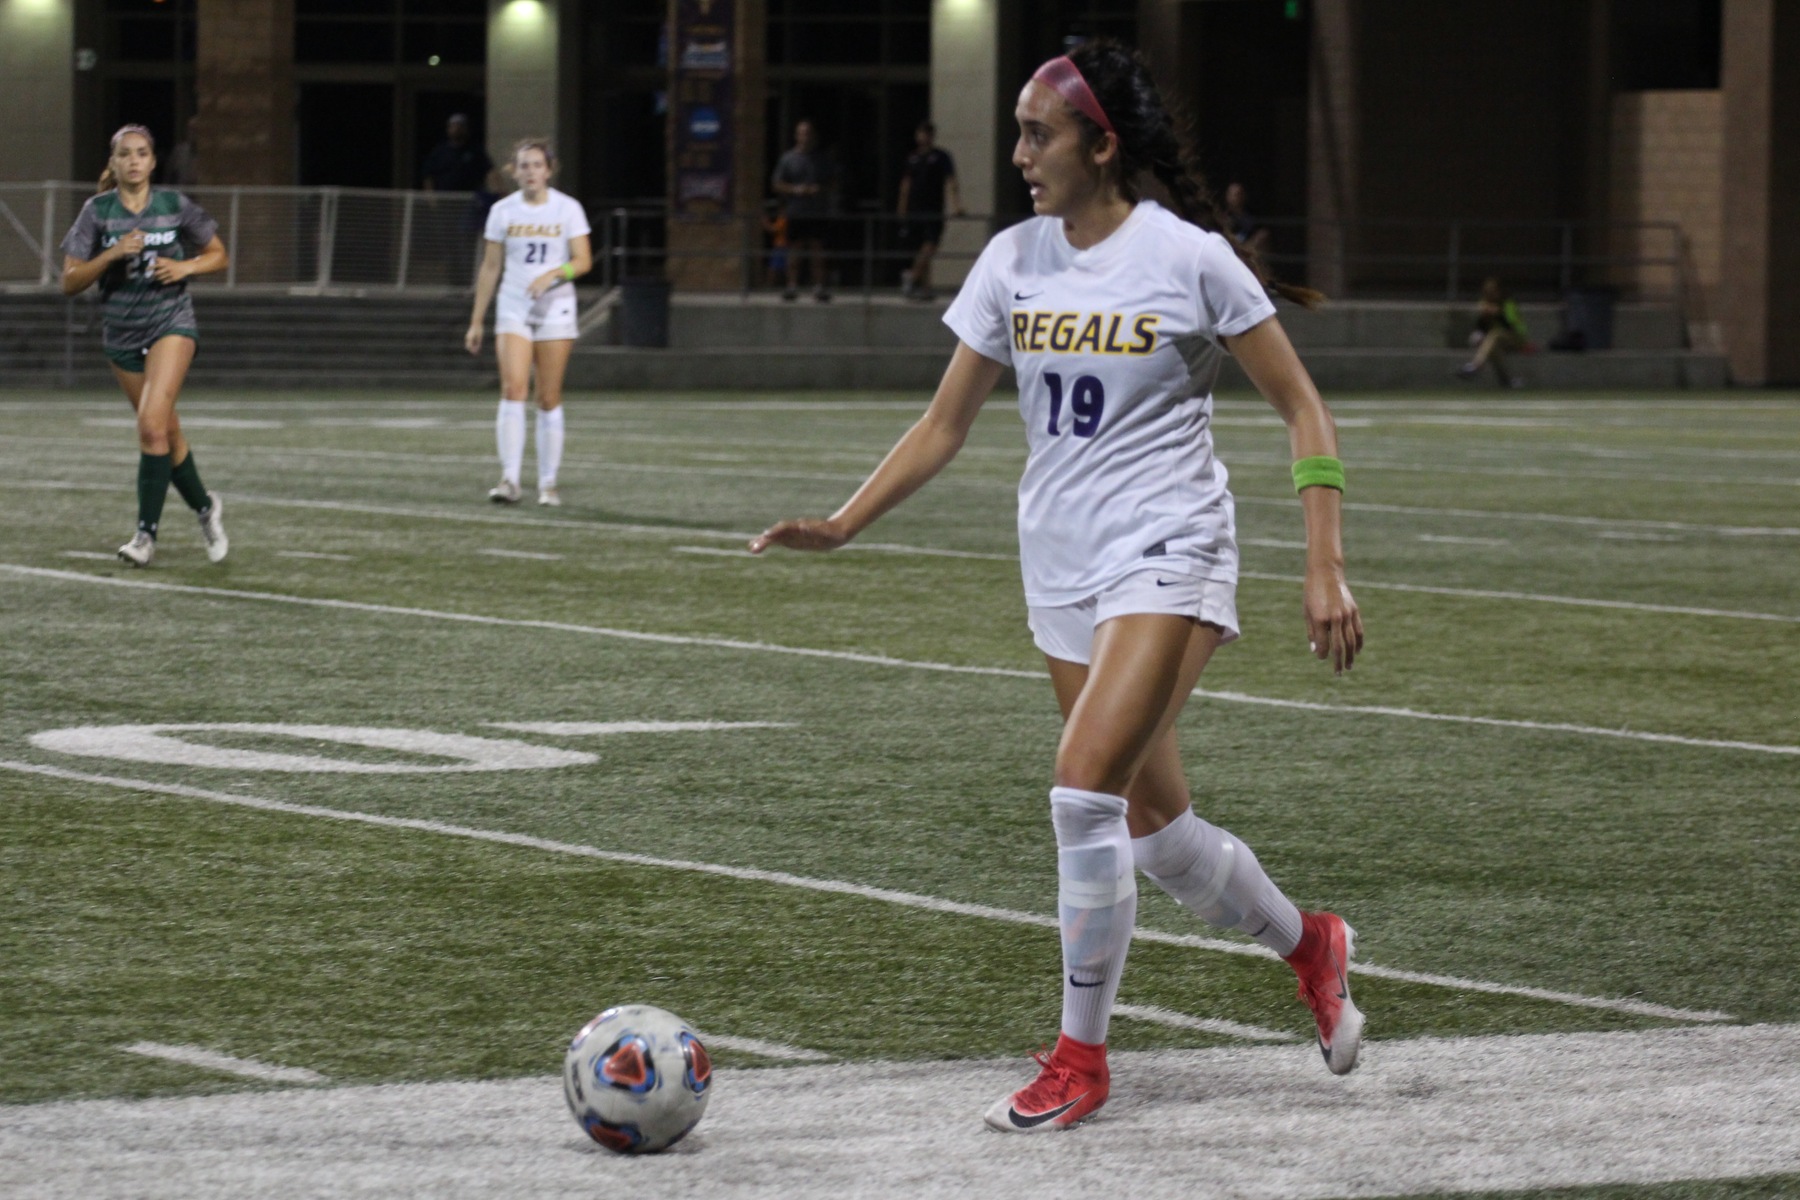 Regals Convert on PK to Win 1-0 Against Leopards